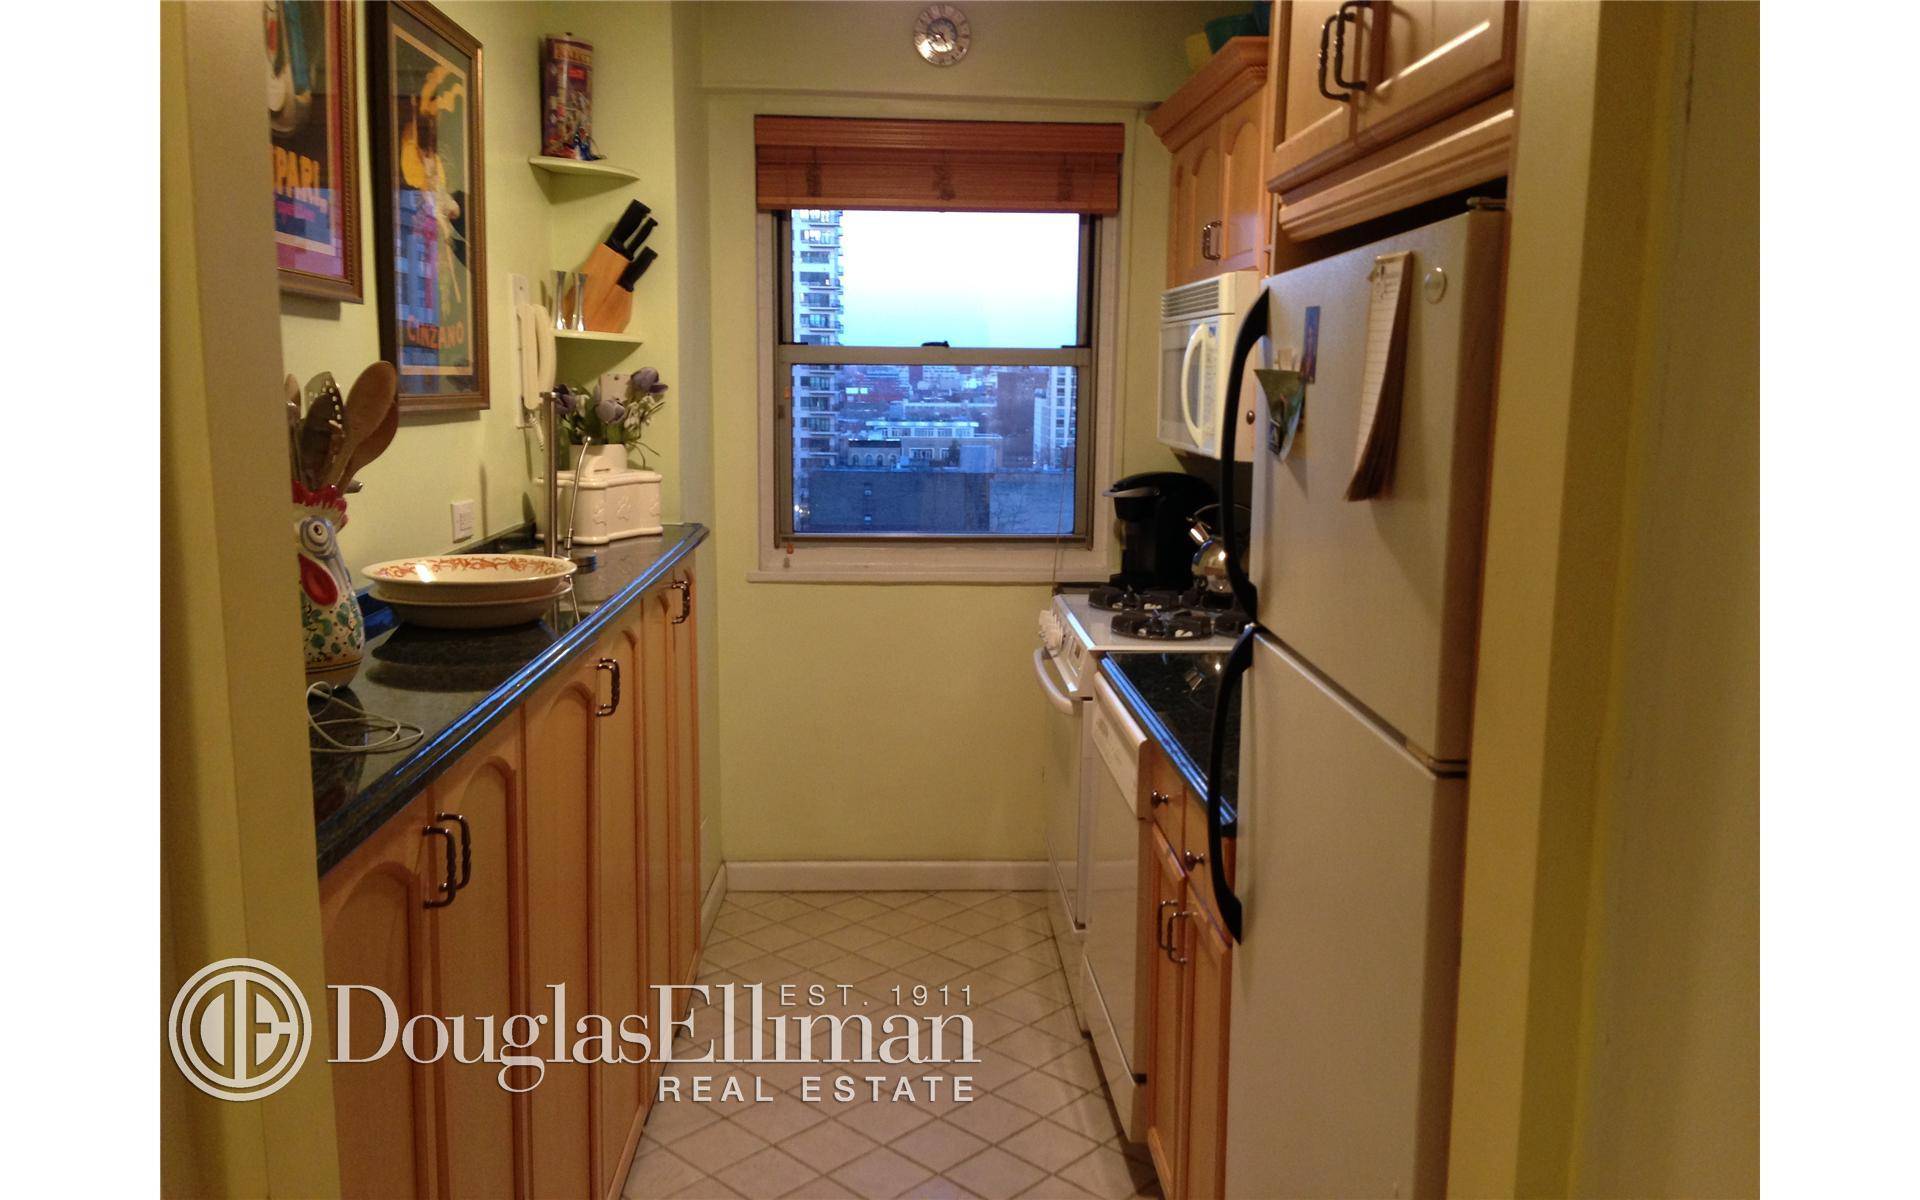 Concord VIllage 195 Adams Unit 9F Featuring a large 1 bed 1 bath approx.